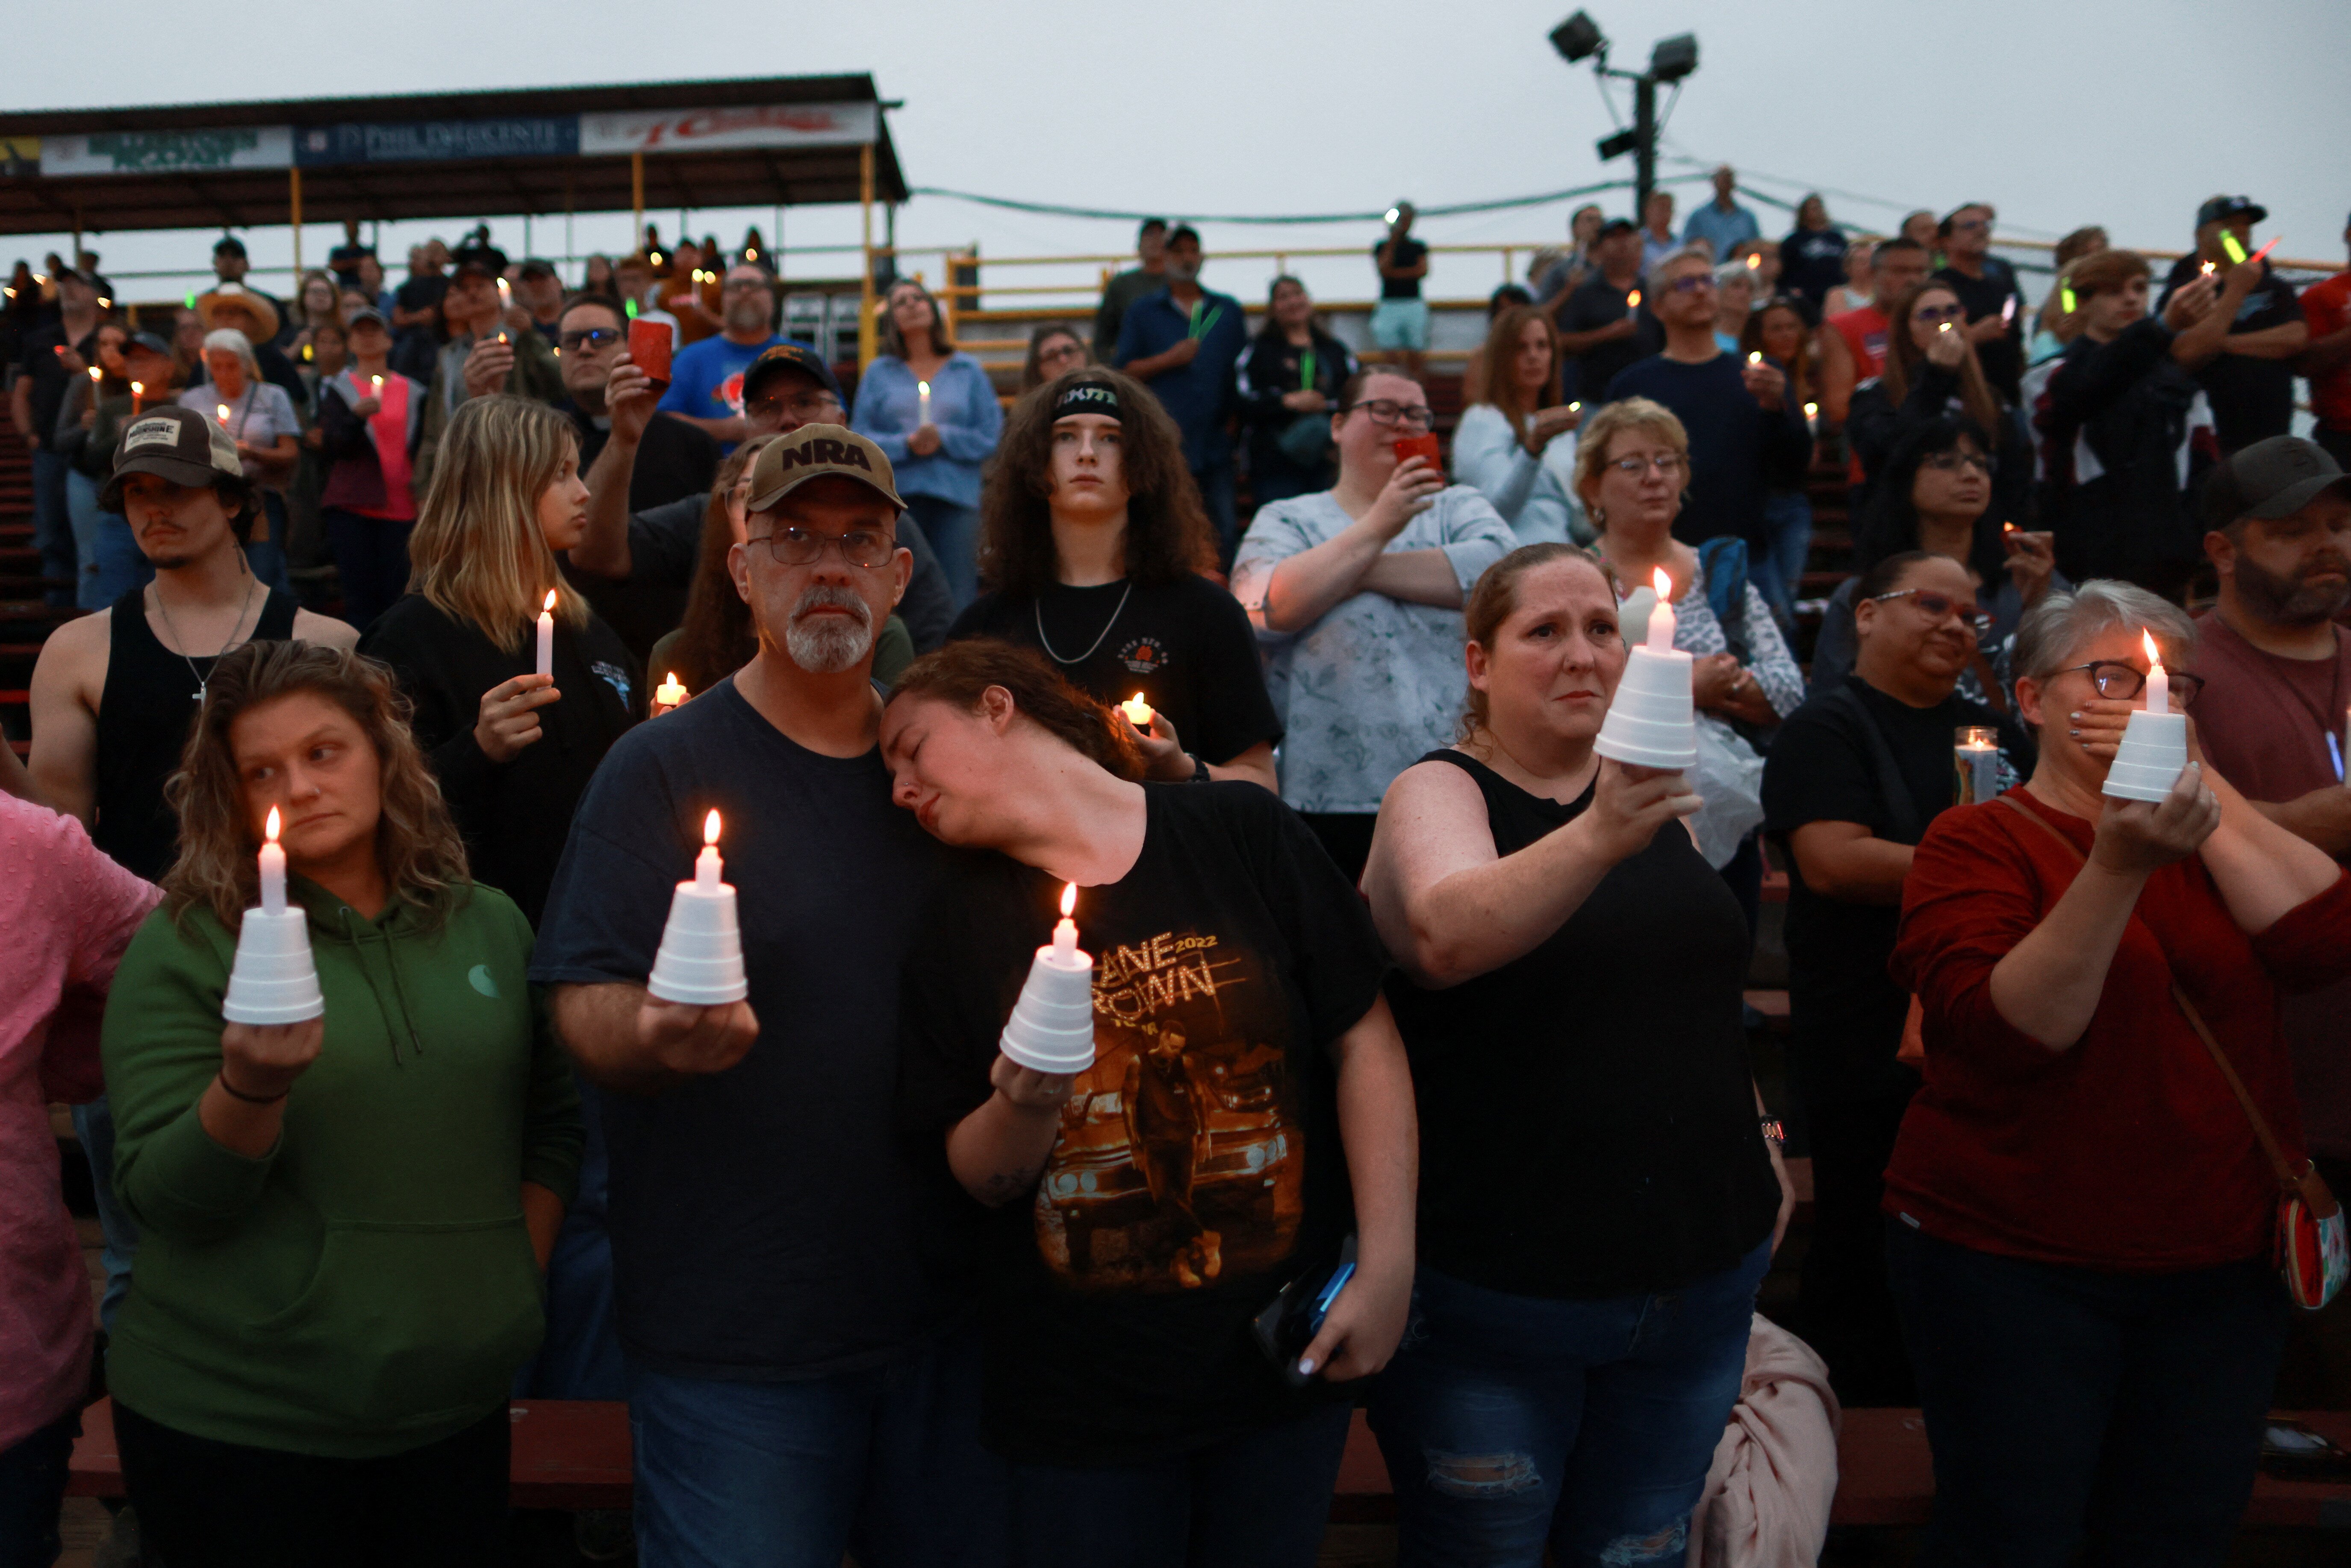 Dave Huston, who went to high school with Corey Comperatore, the former volunteer fire department chief killed at Republican presidential nominee Donald Trump's rally, and his daughter Becca Huston react as people hold candles during an event to honor Corey, at Lernerville Speedway in Sarver, Pennsylvania, U.S., July 17, 2024. REUTERS/Carlos Osorio